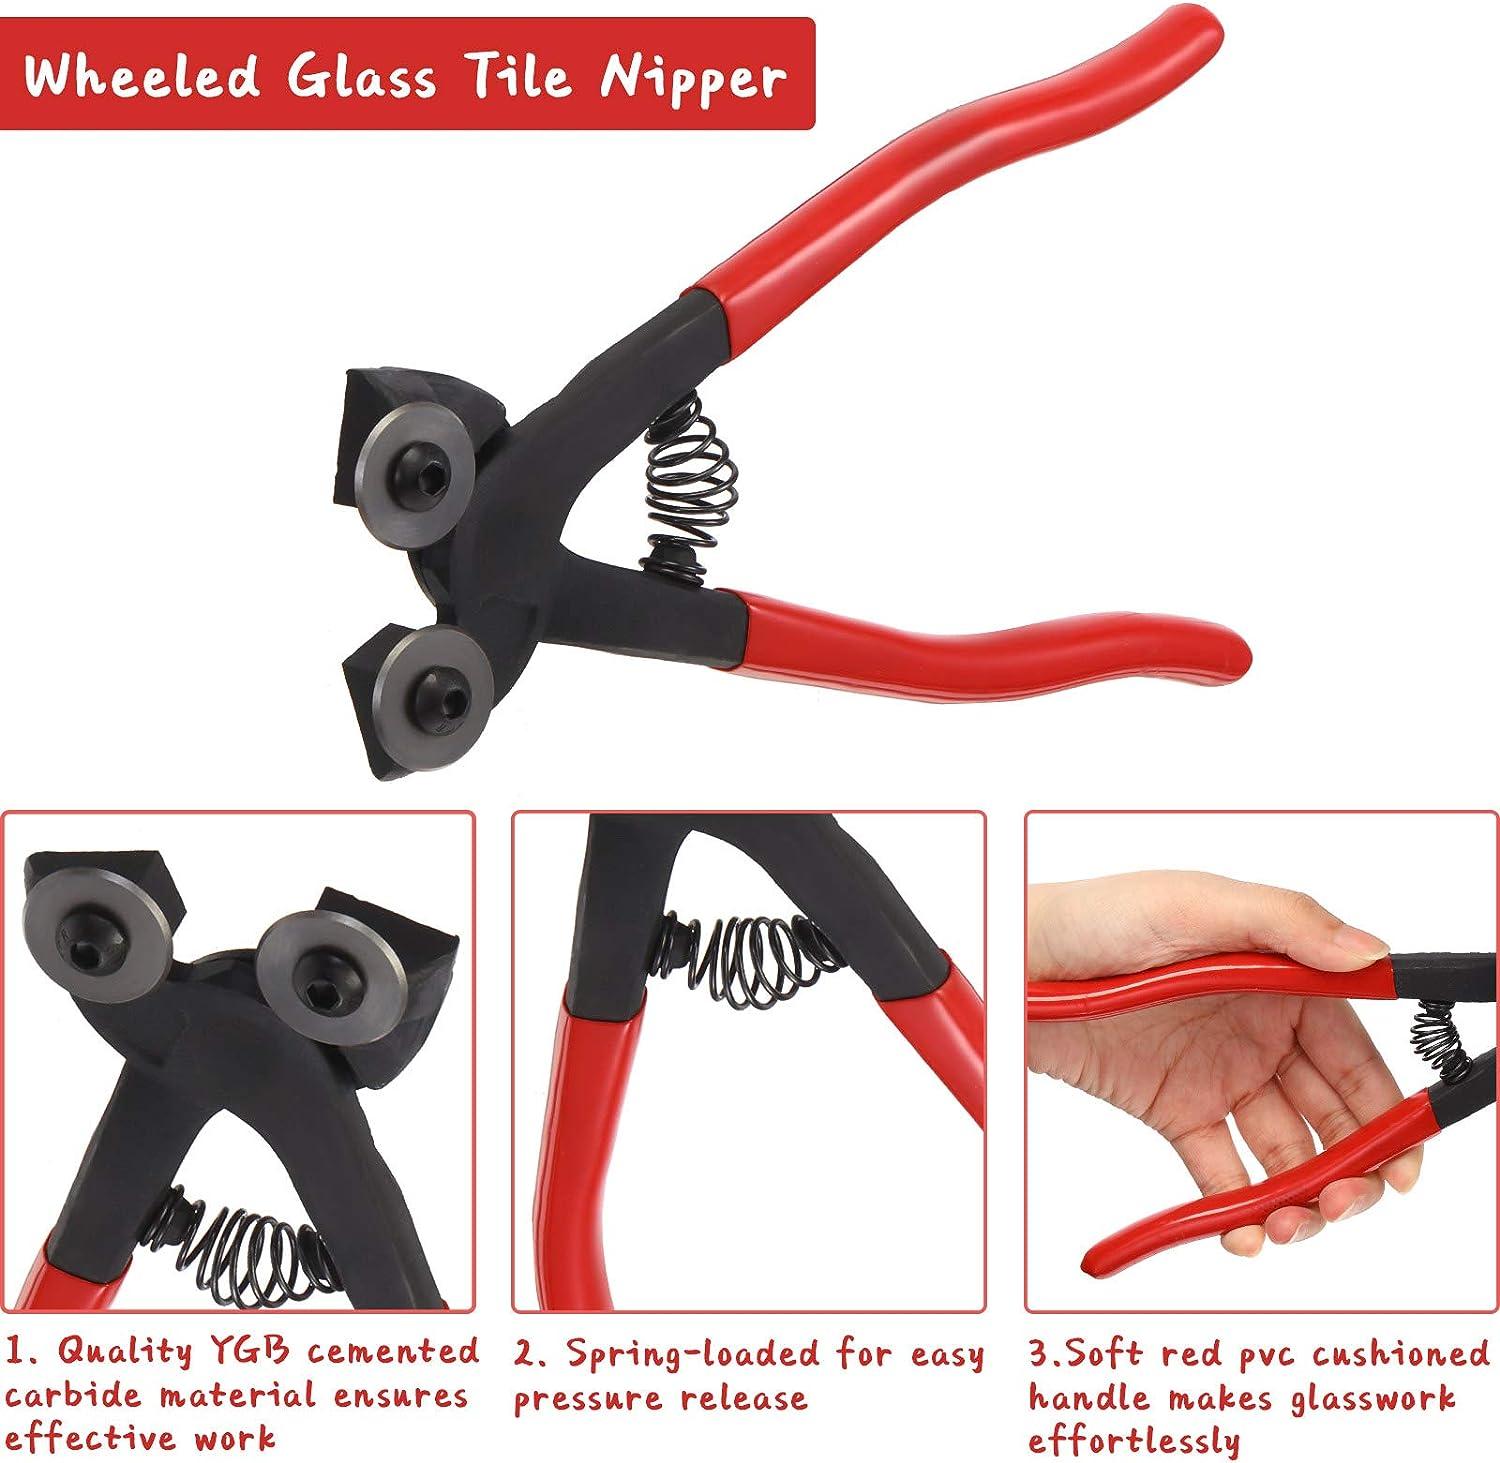 Hilitchi 5Pcs Wheeled Glass Tile Nipper Running Plier Breaking